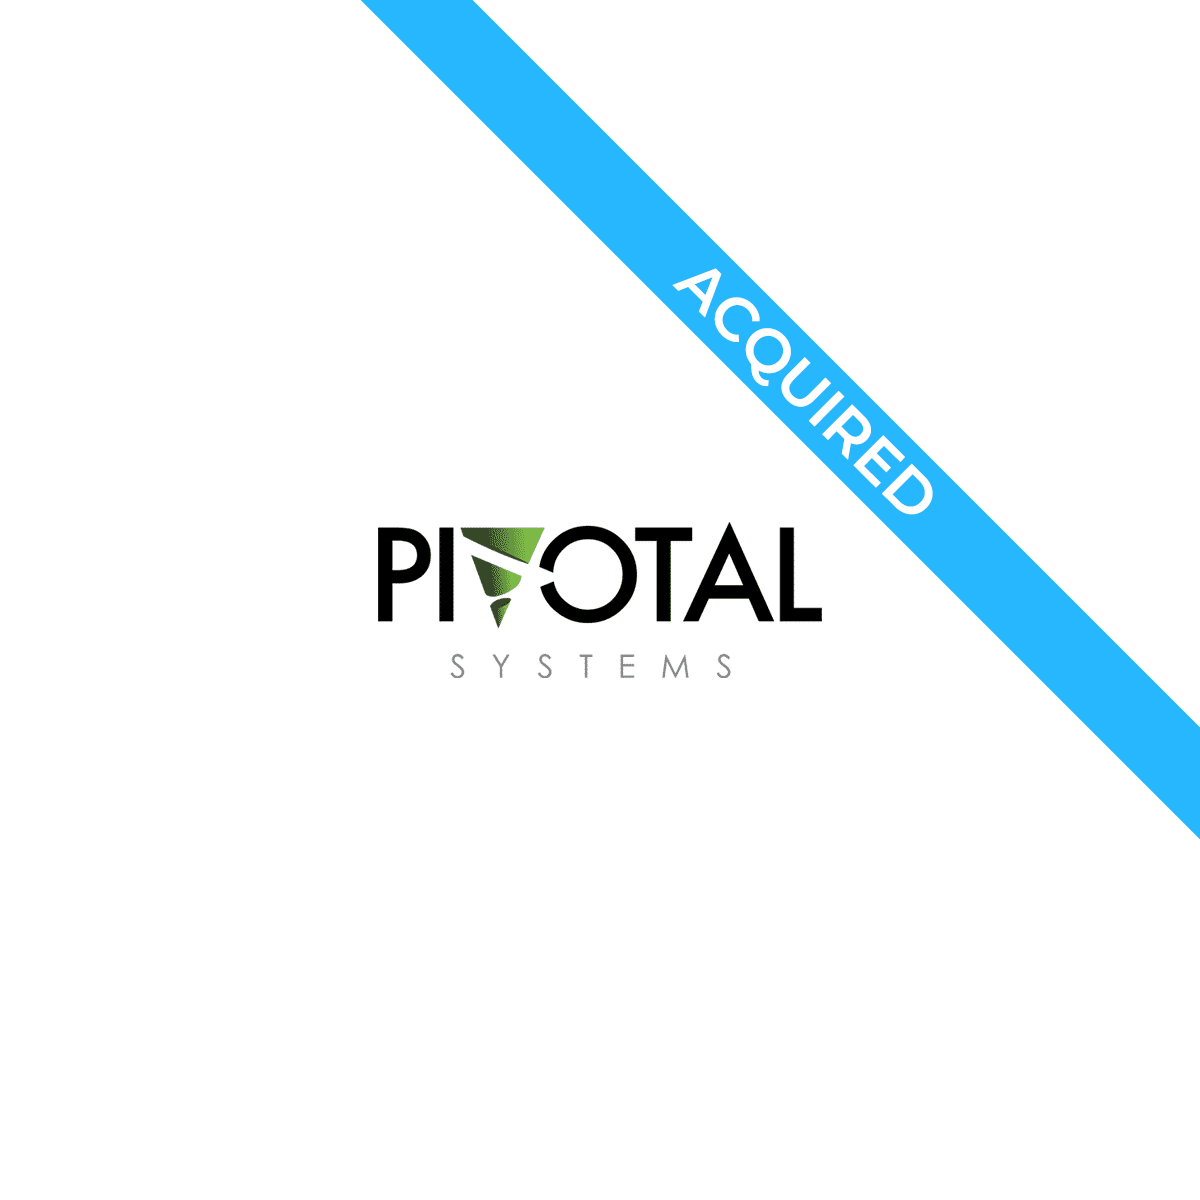 Pivotal Systems